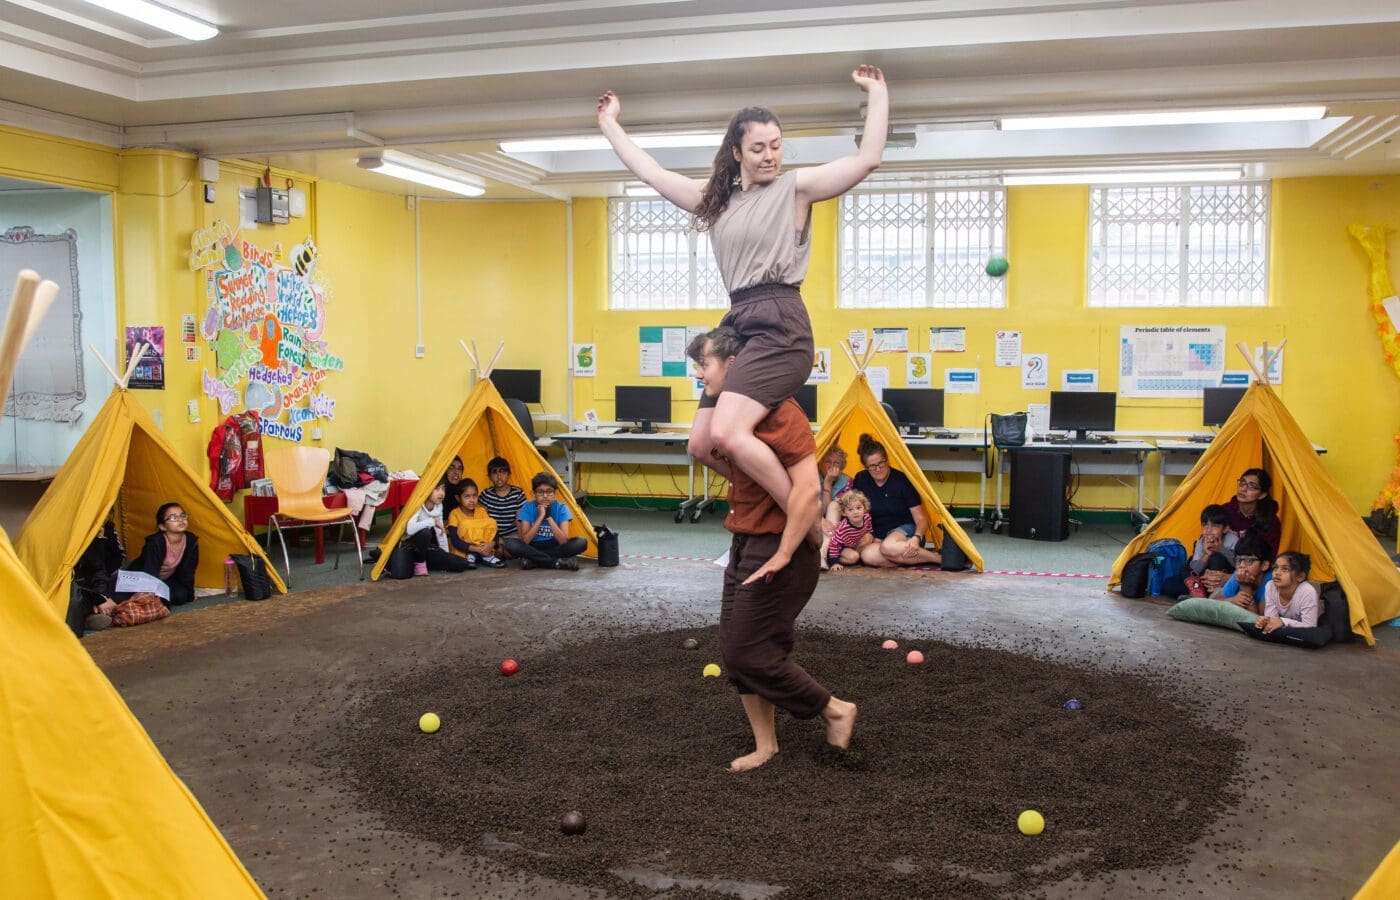 Seasons performance in libraries. Two acrobatics perform a move in front of an audience